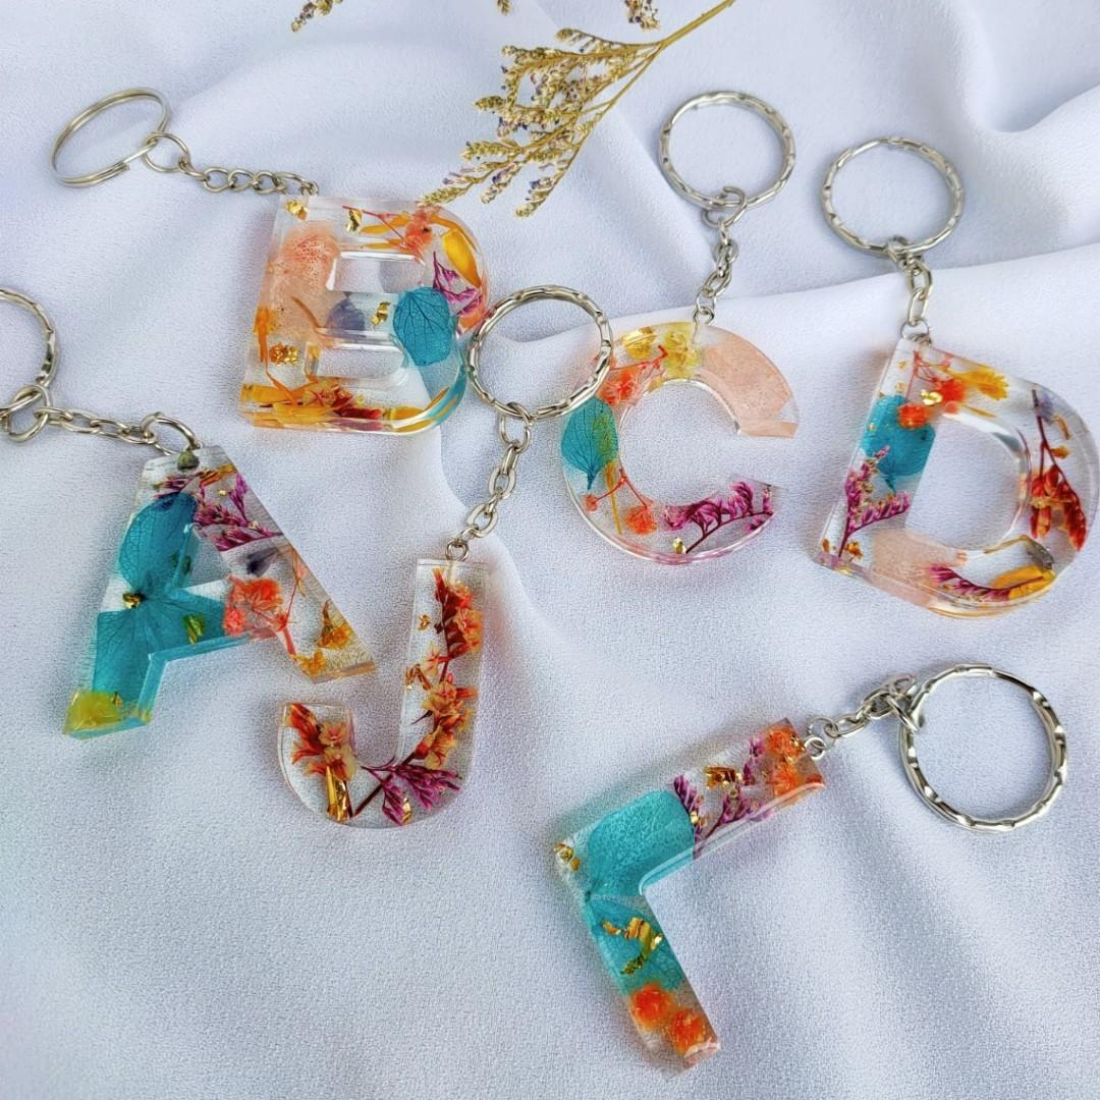 Resin Reflections: DIY Resin Keychain Making Kit - Craft Your Own Stylish  and Personalized Keychains